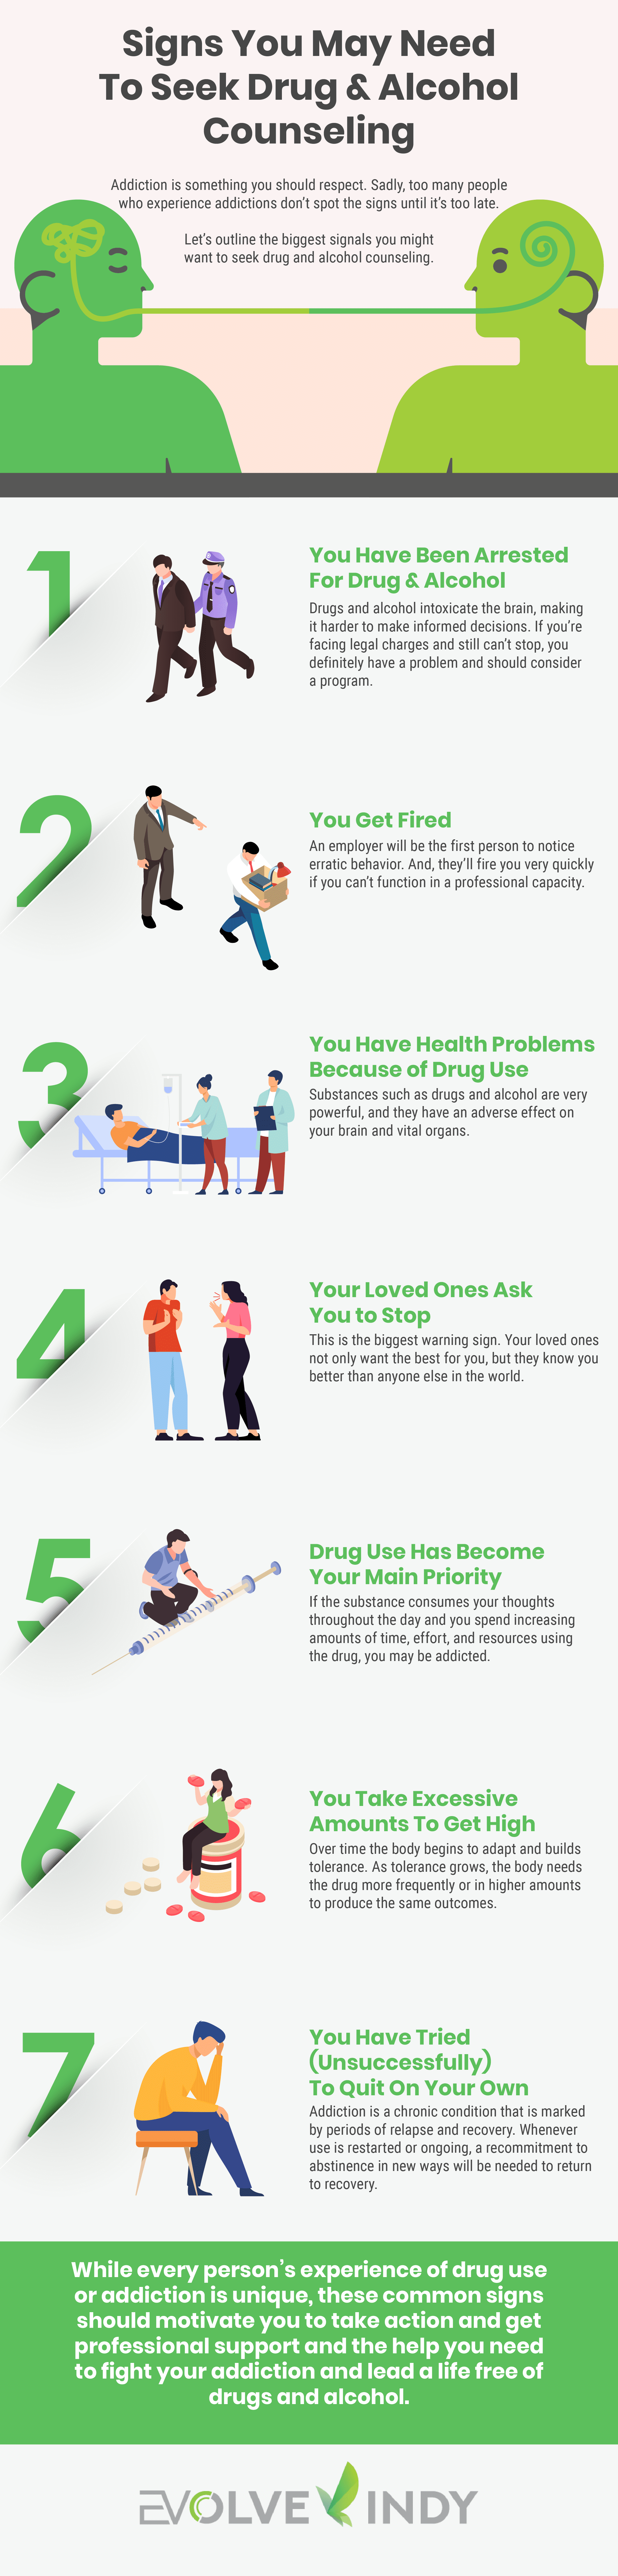 Signs You May Need To Seek Drug & Alcohol Counseling - Infographic